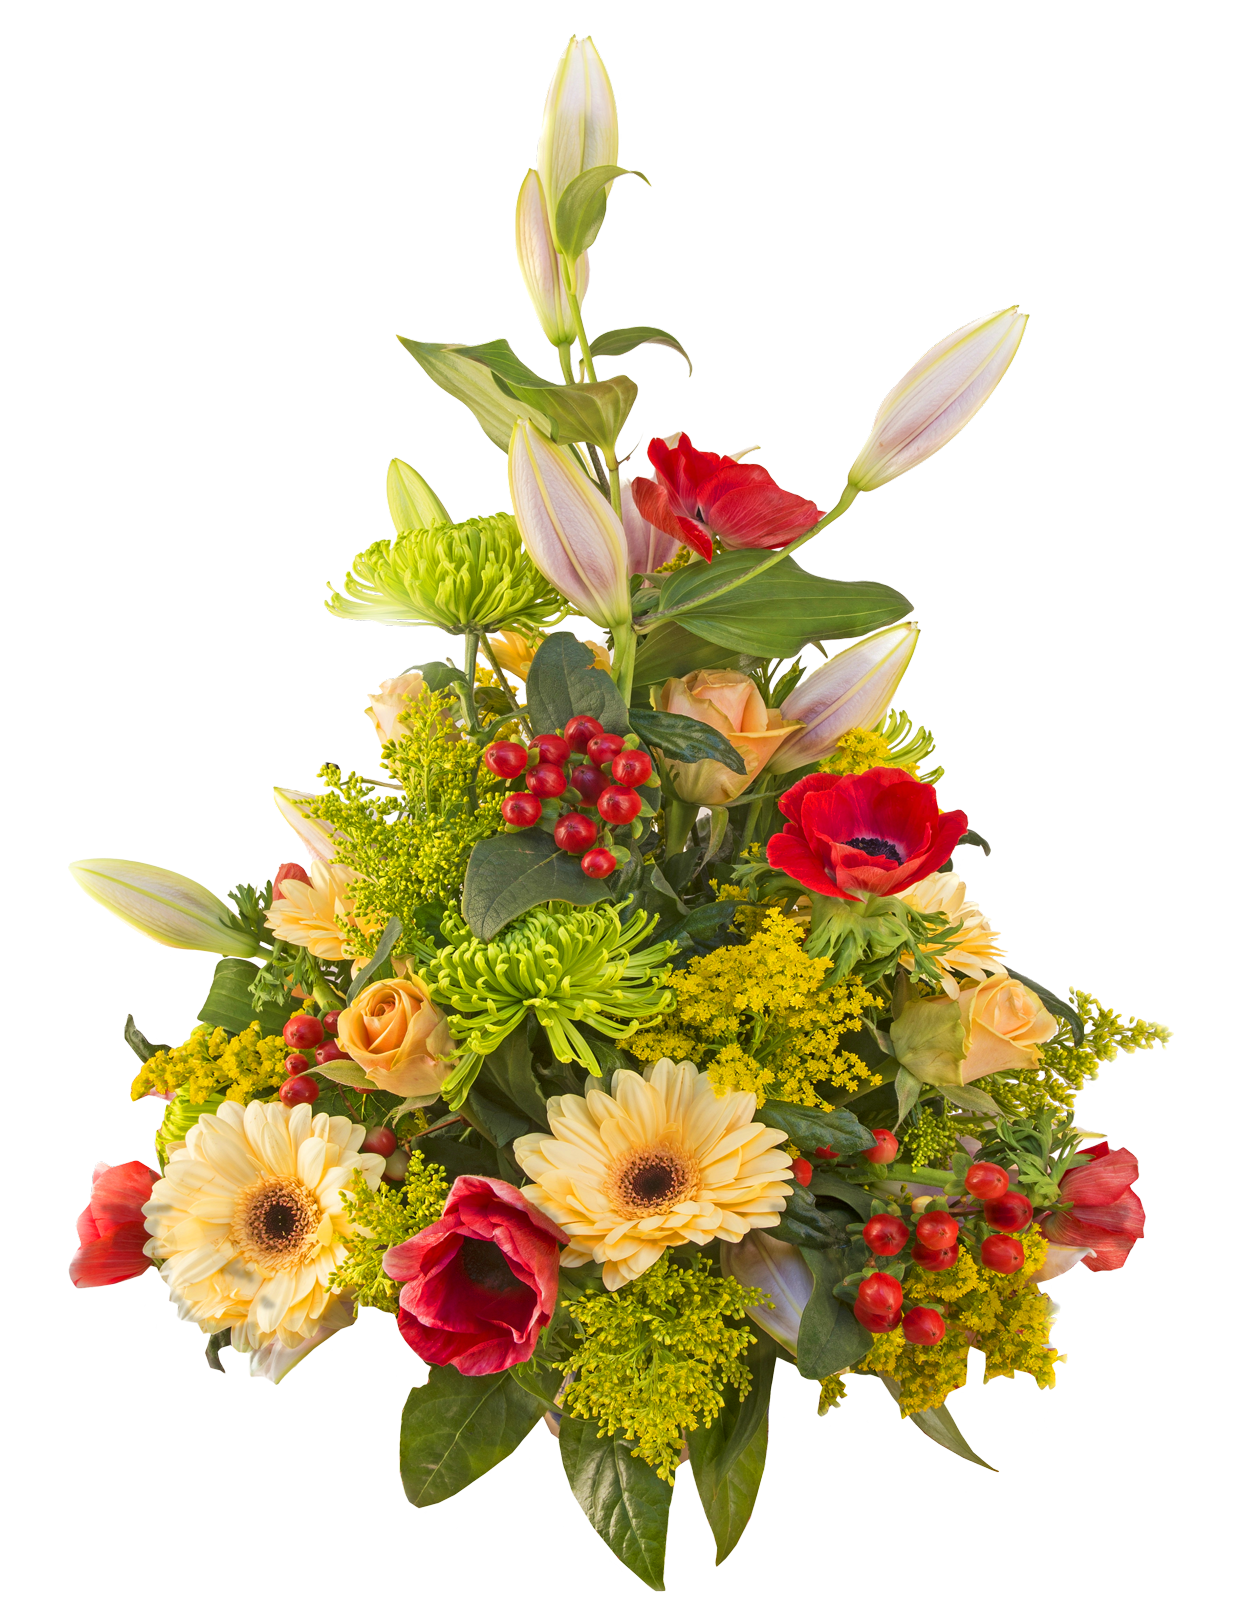 Bouquet of flowers PNG images free download.